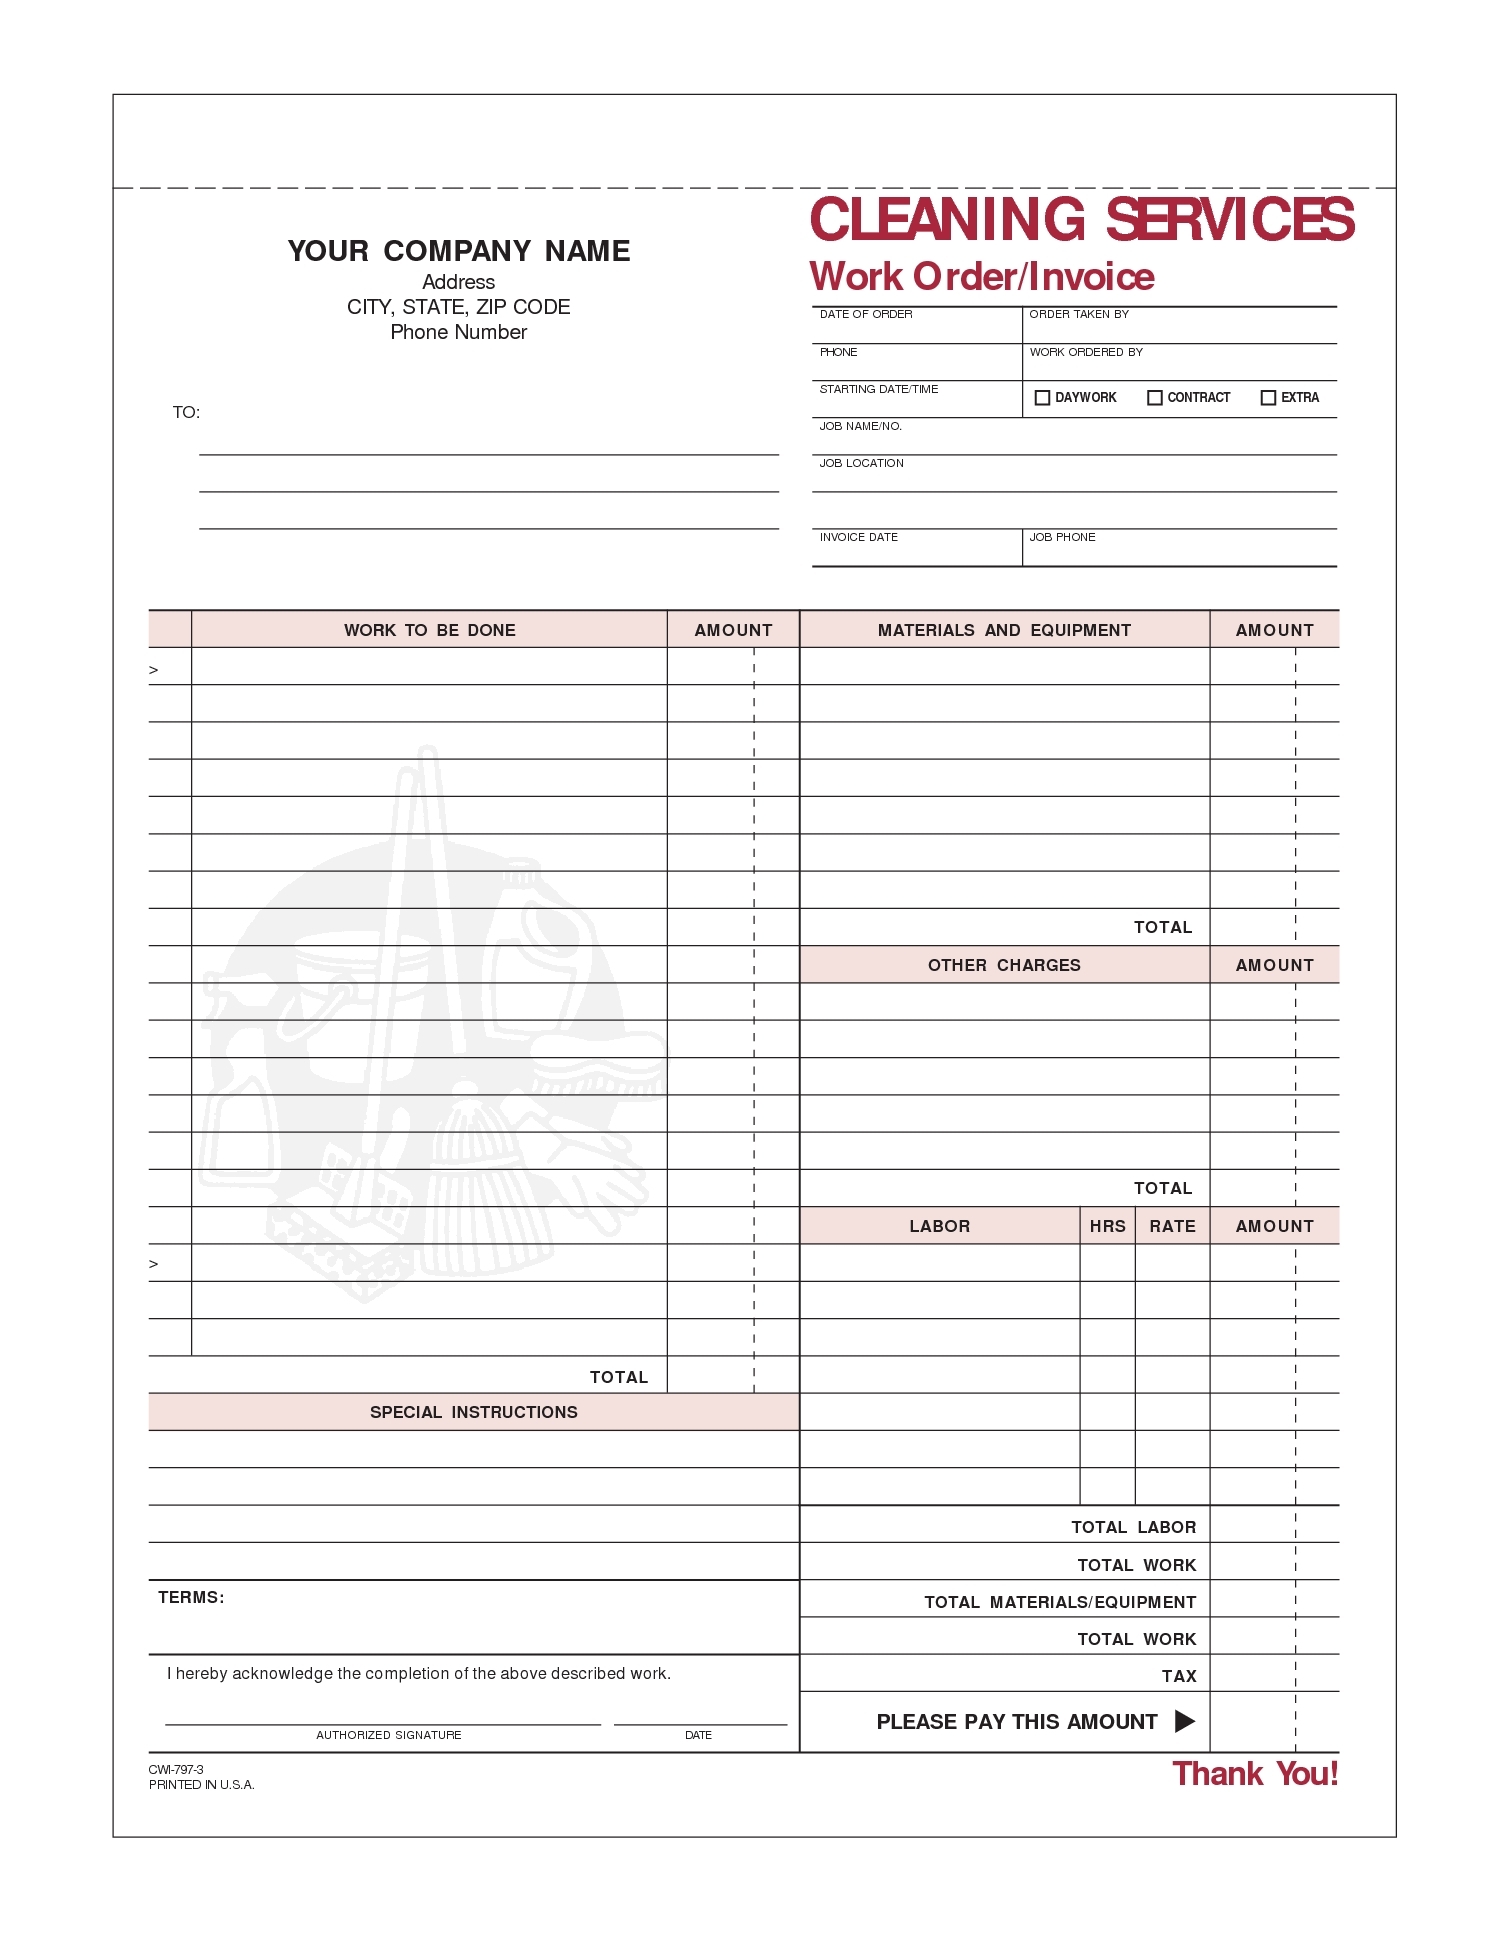 cleaning-services-invoice-sample-invoice-template-ideas